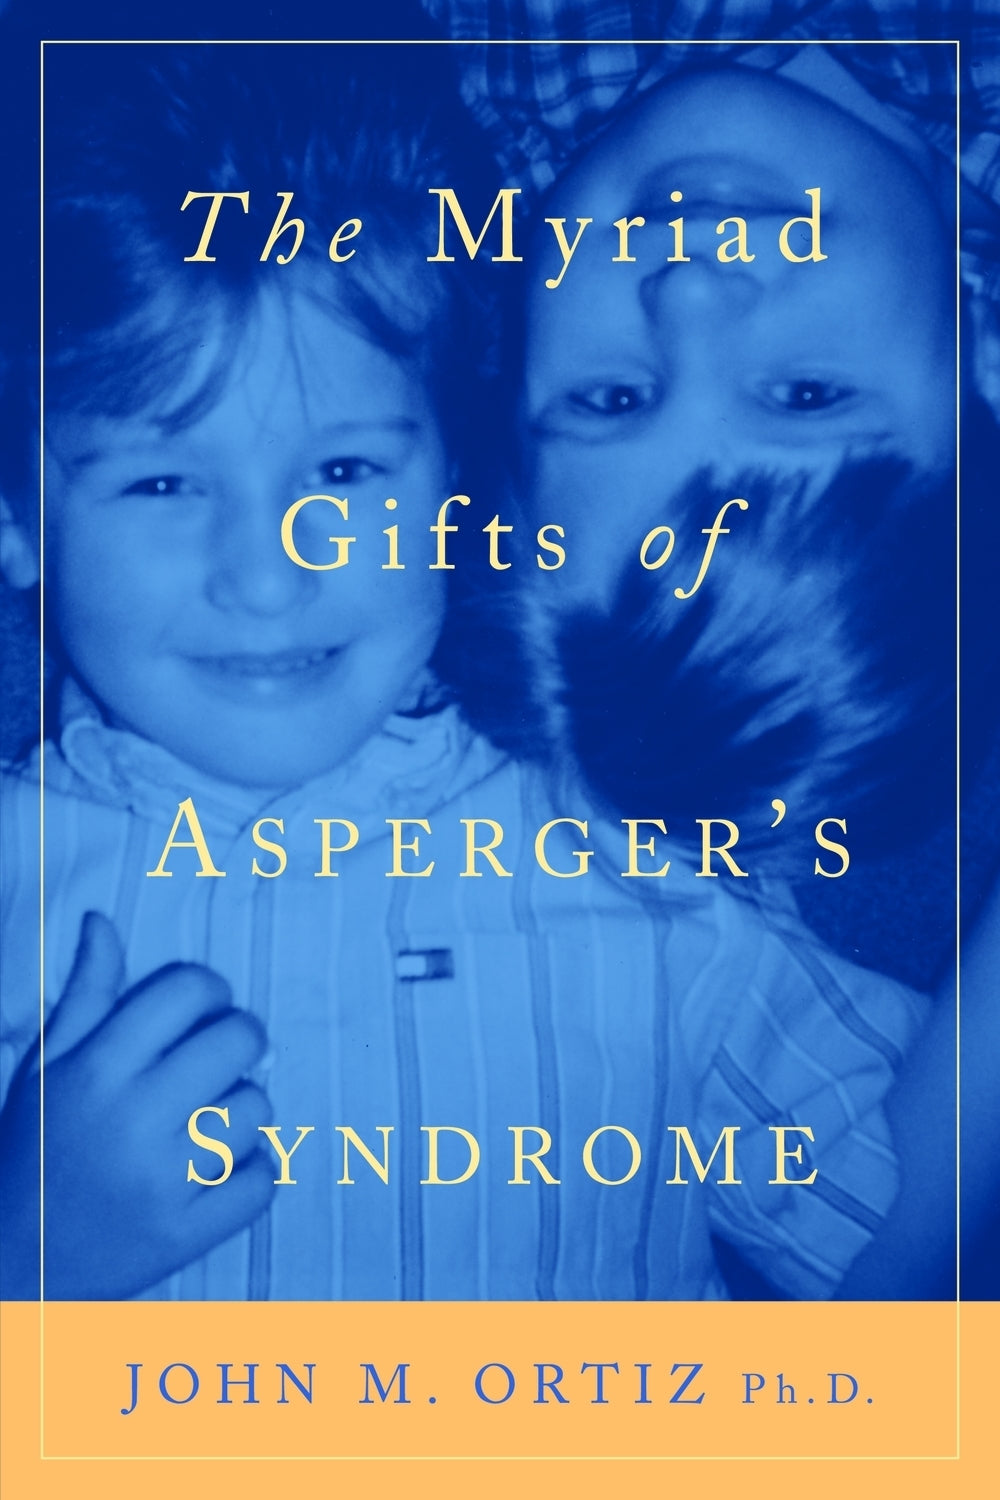 The Myriad Gifts of Asperger's Syndrome by John M. Ortiz